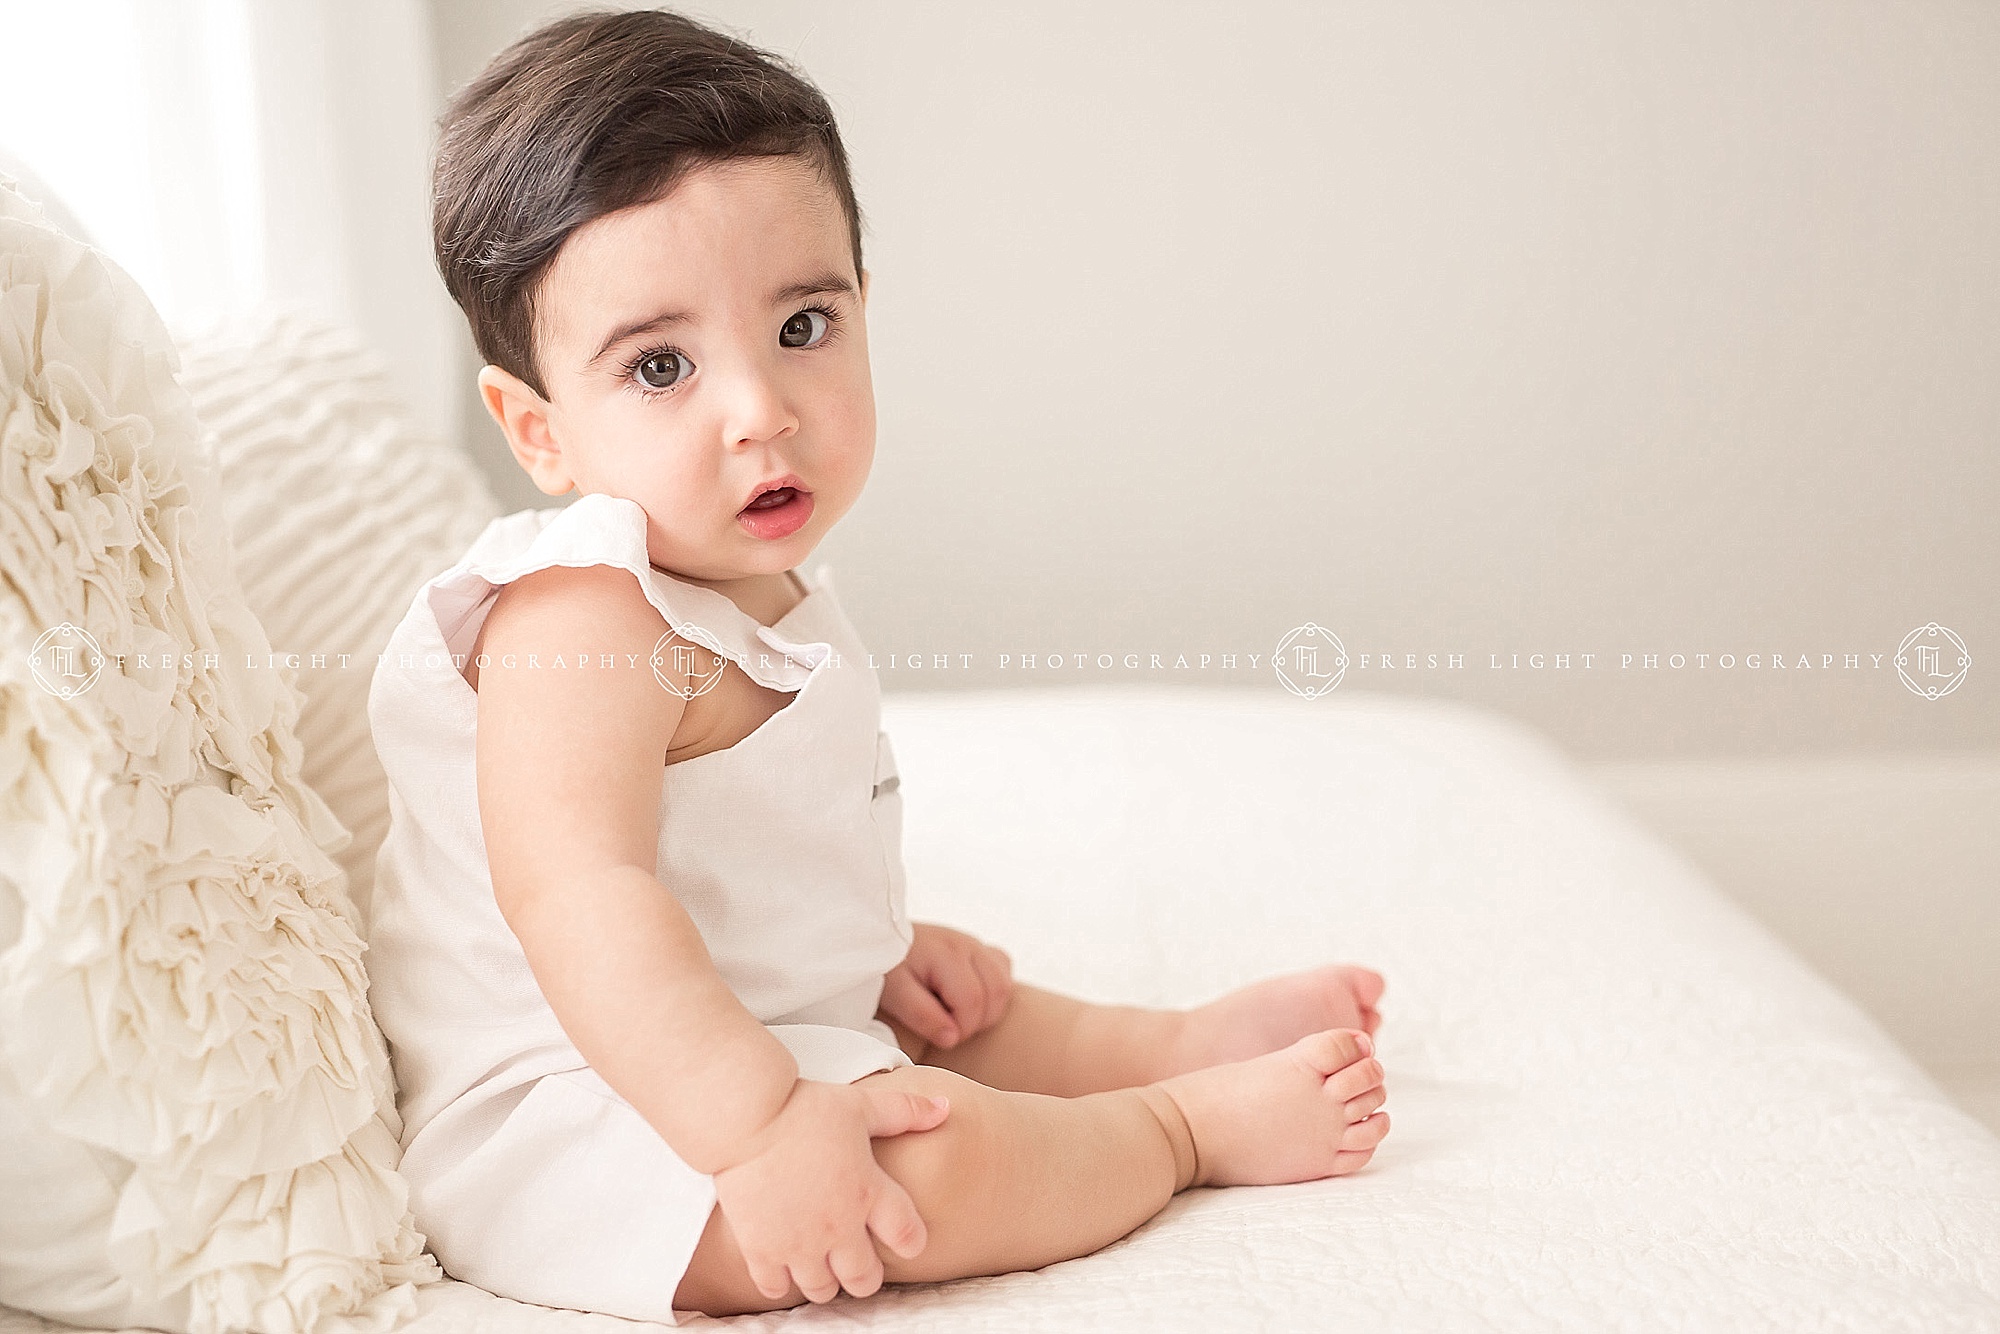 baby boy wearing white at photography session houston